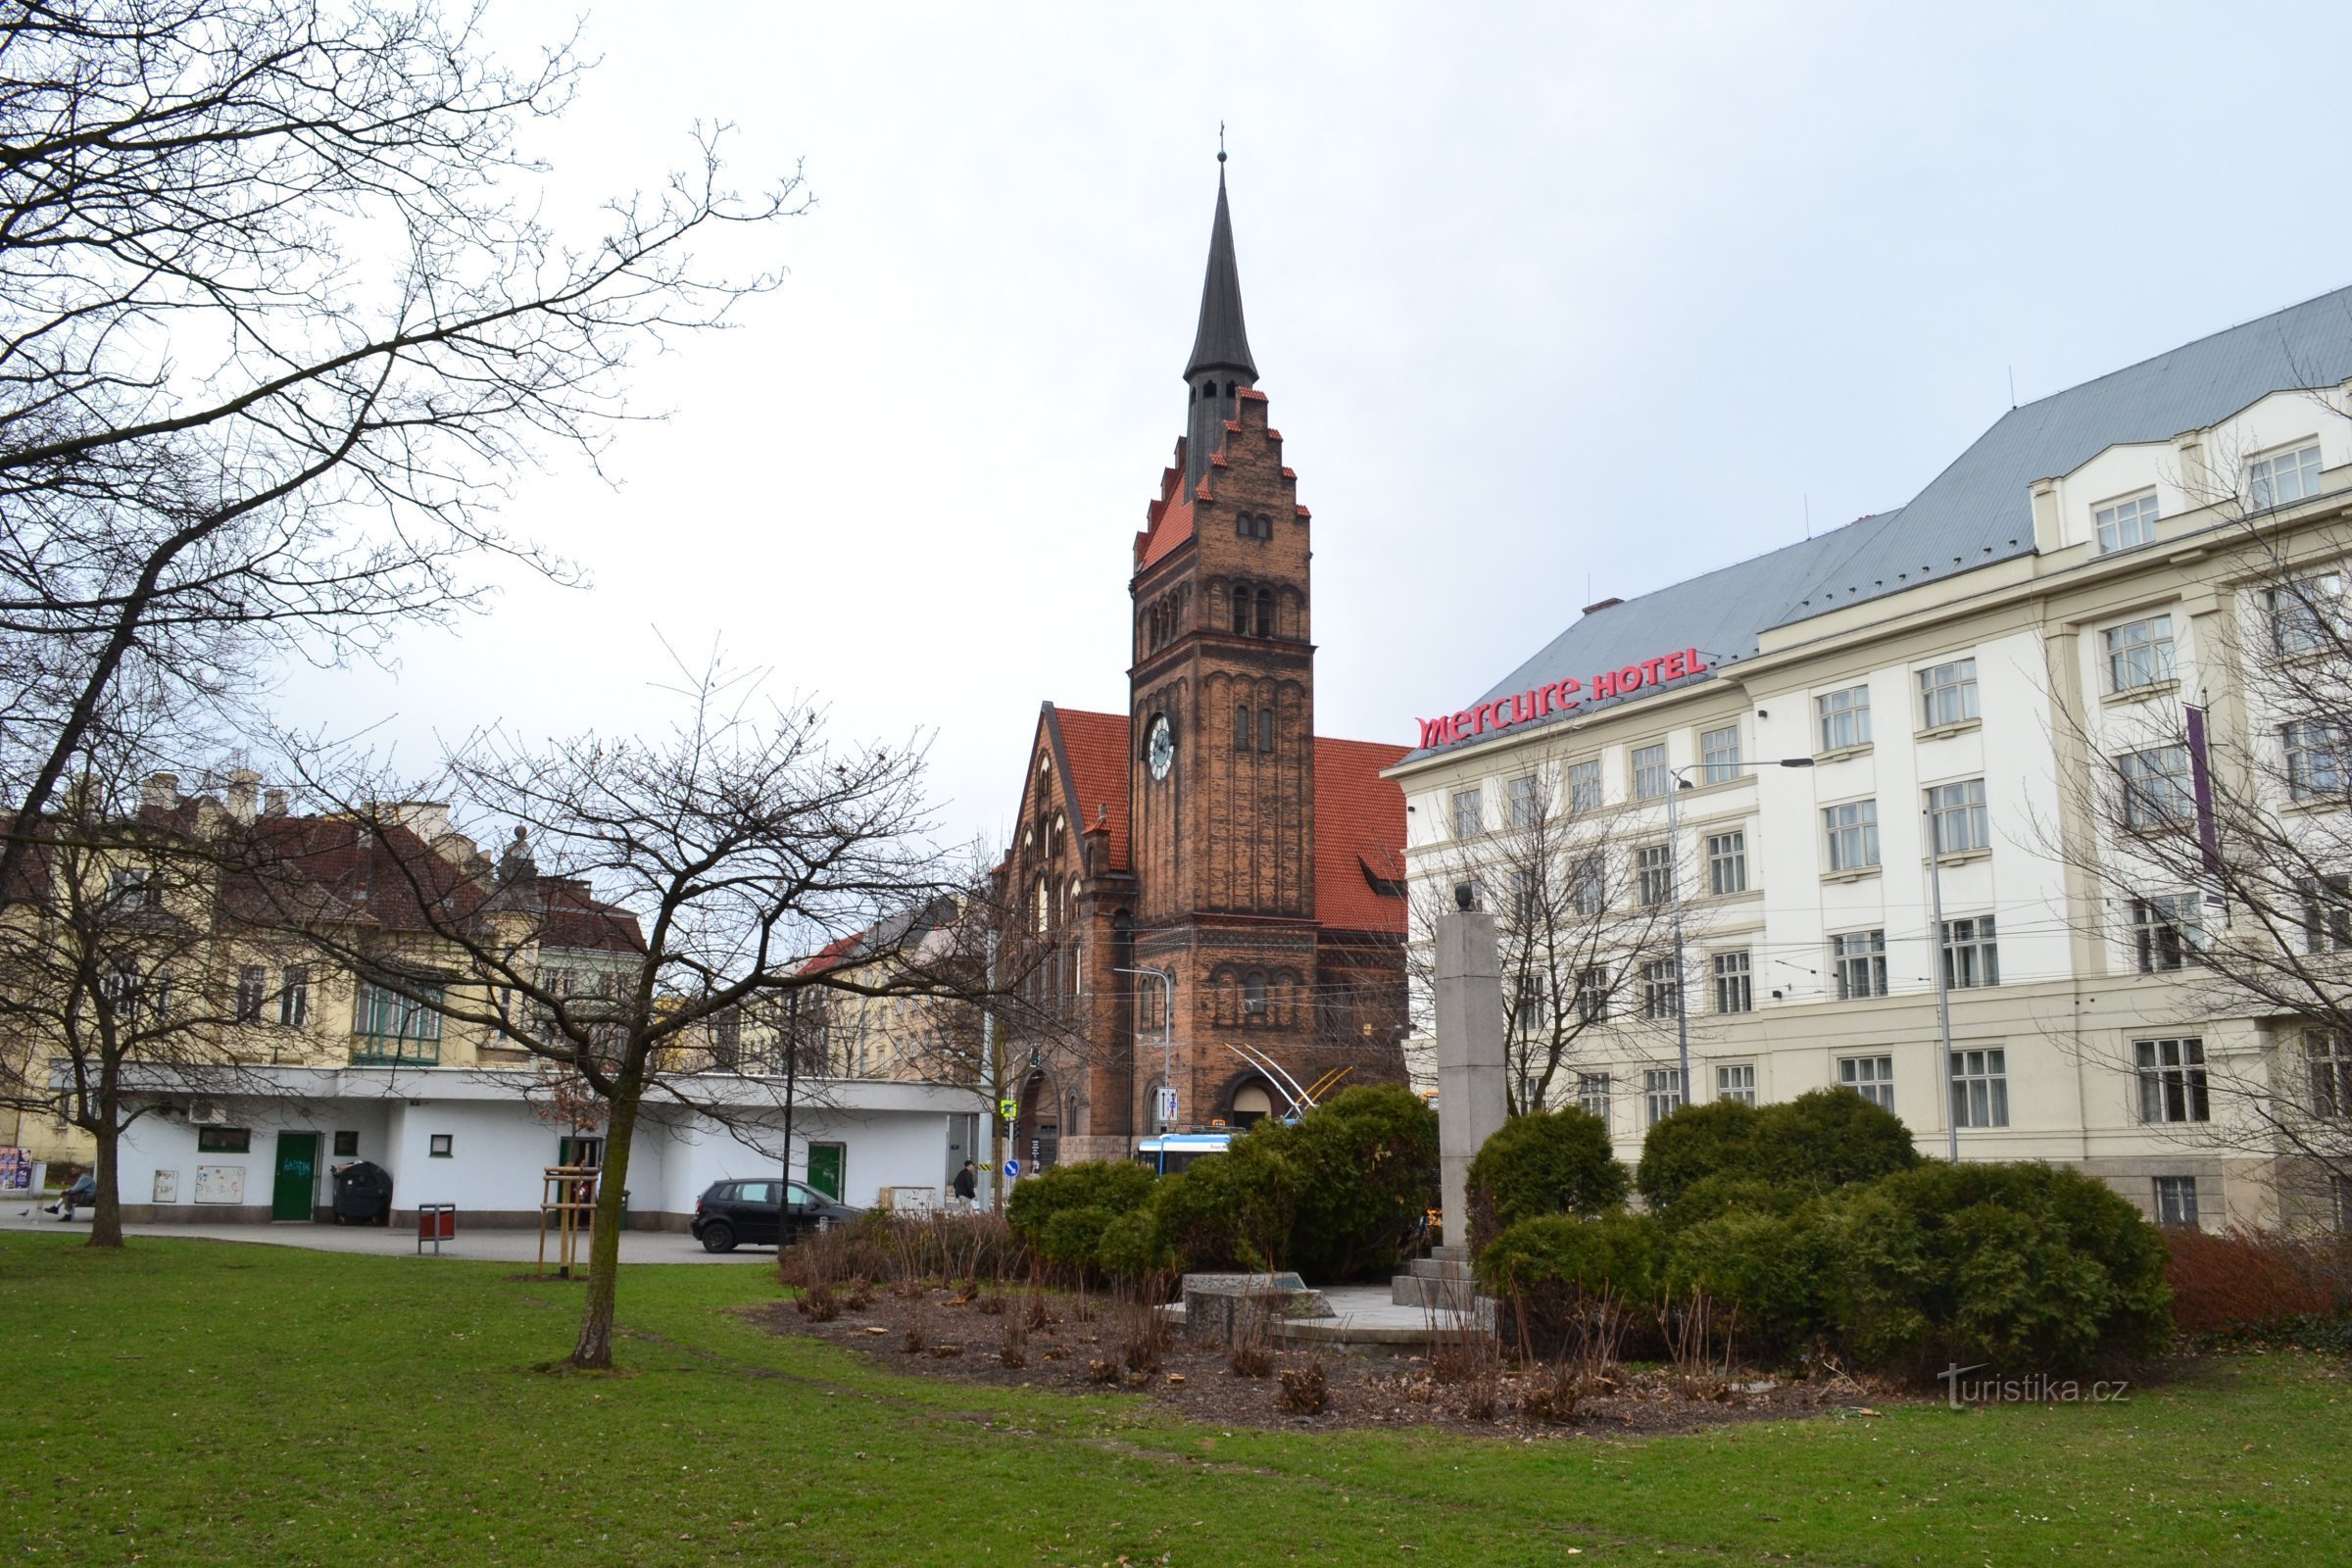 view from the park of the church and hotel